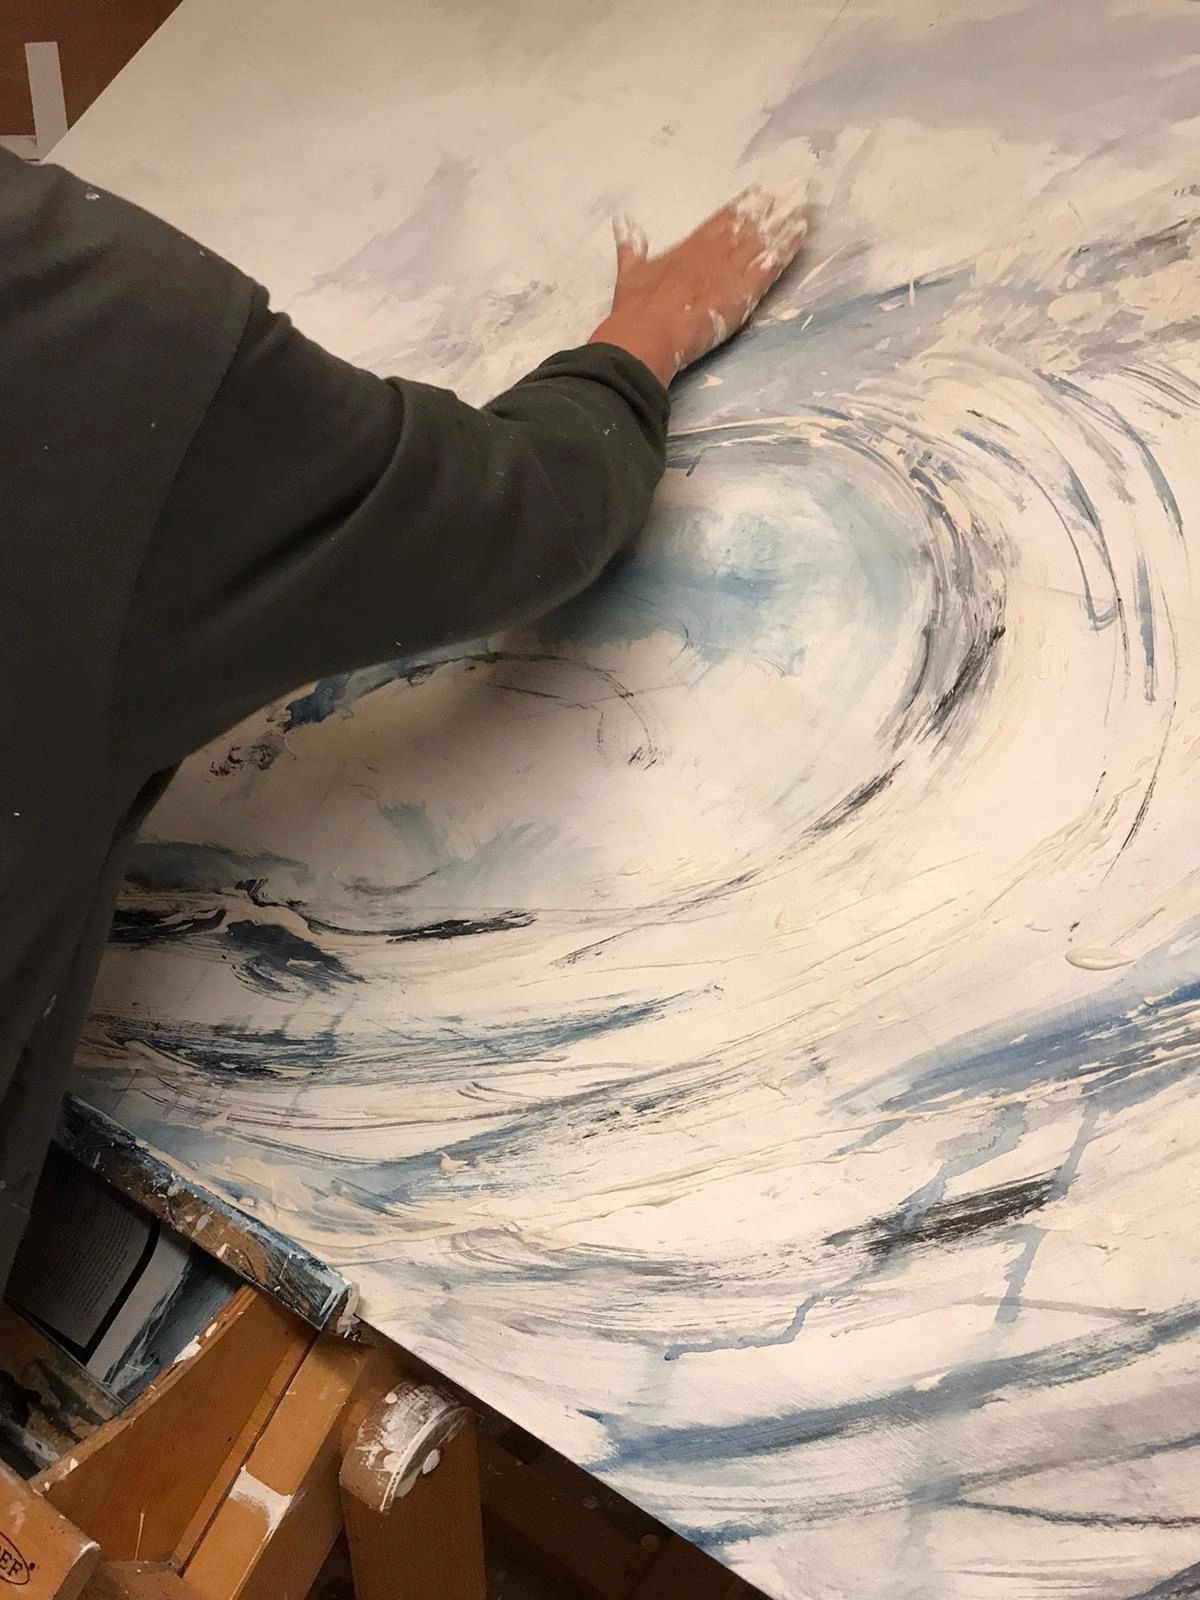 A painter painting with their hand